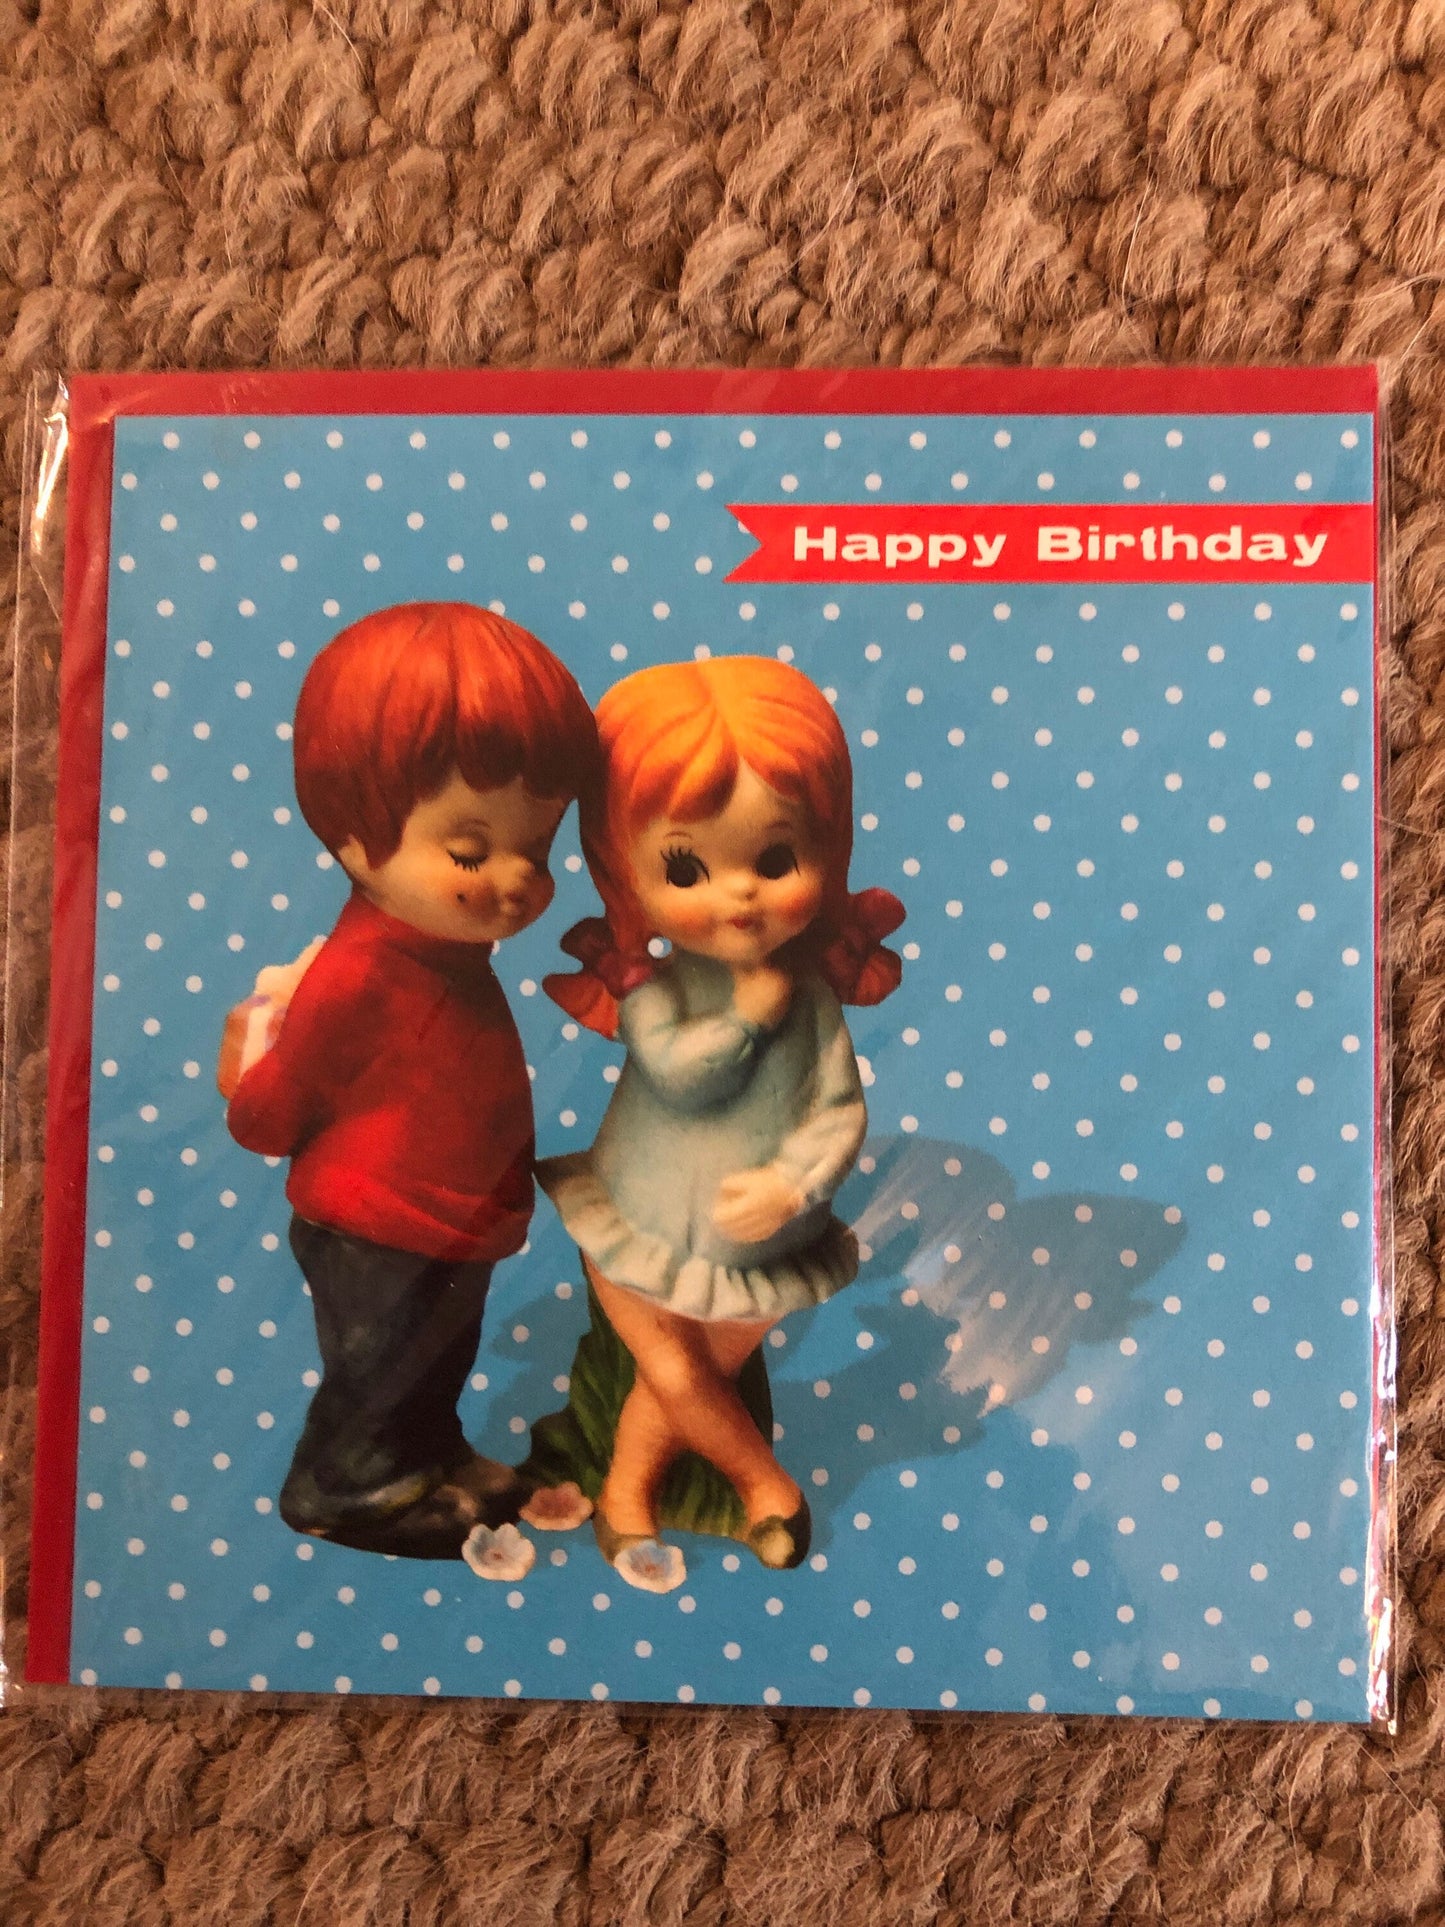 Vintage retro kitsch happy birthday card 1950s 1960s little boy with gift for girl